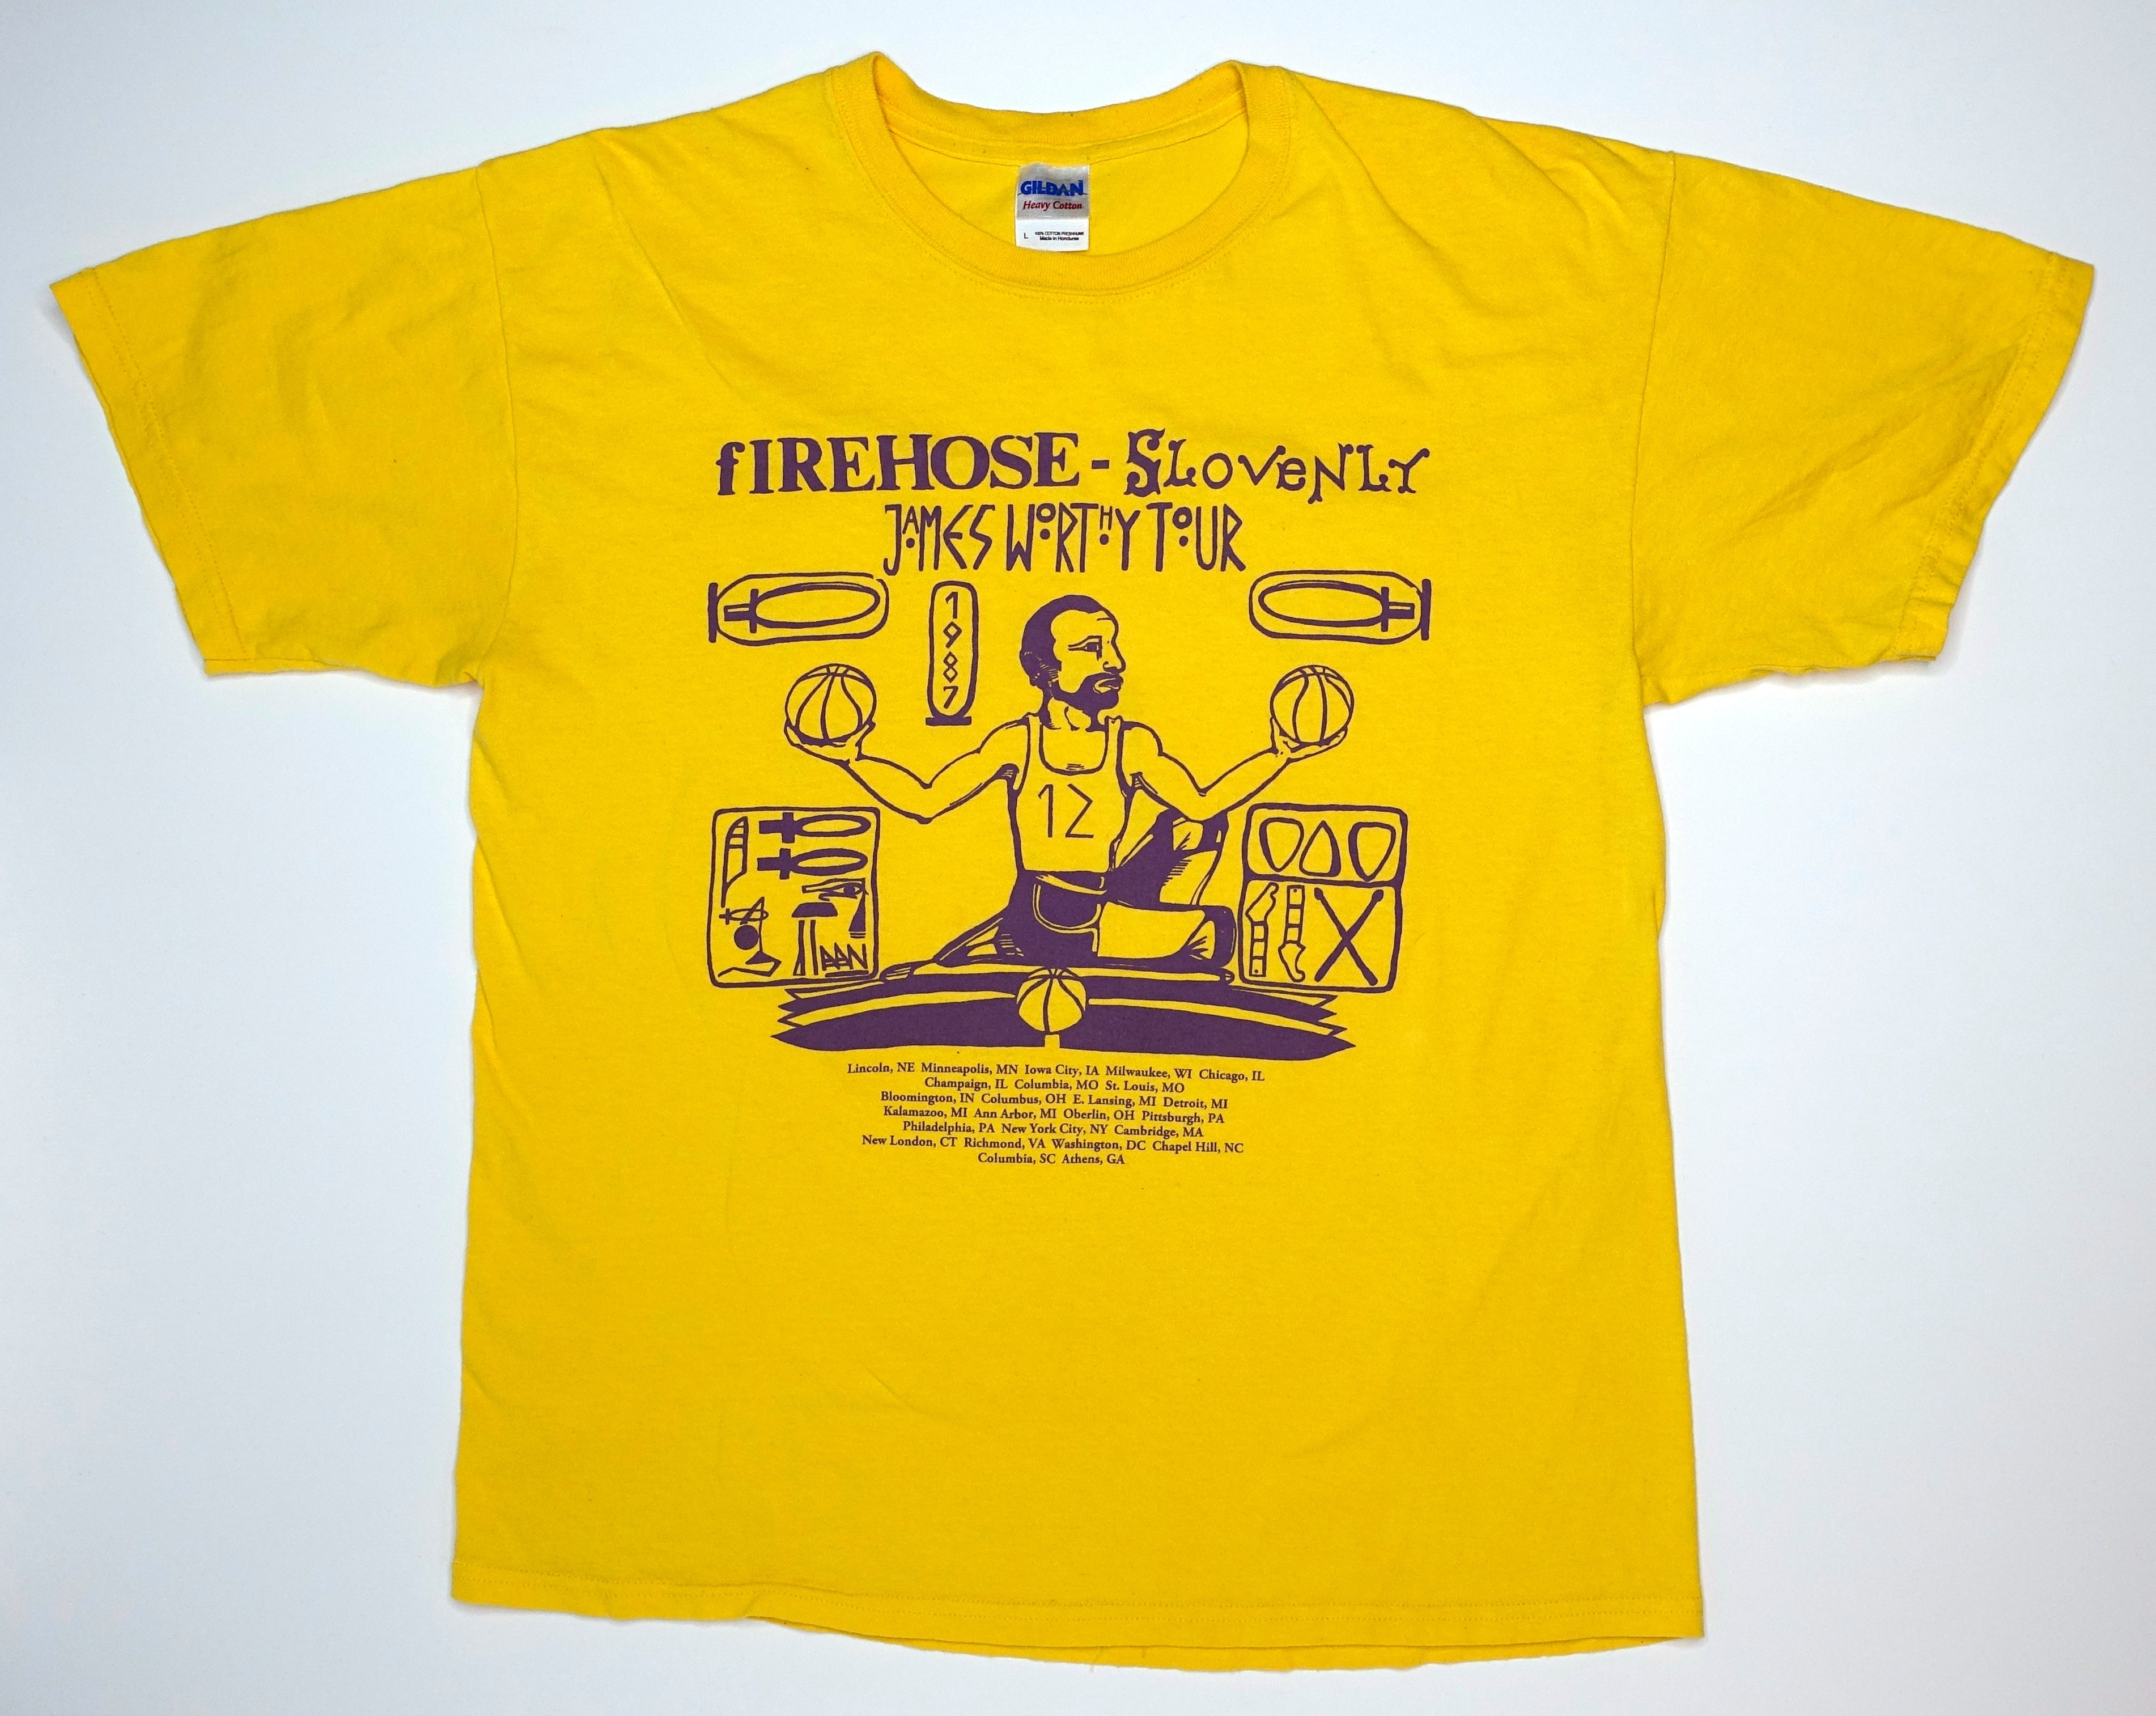 fIREHOSE / Slovenley - James Worthy 1987 Tour Shirt (Bootleg By Me) Size Large